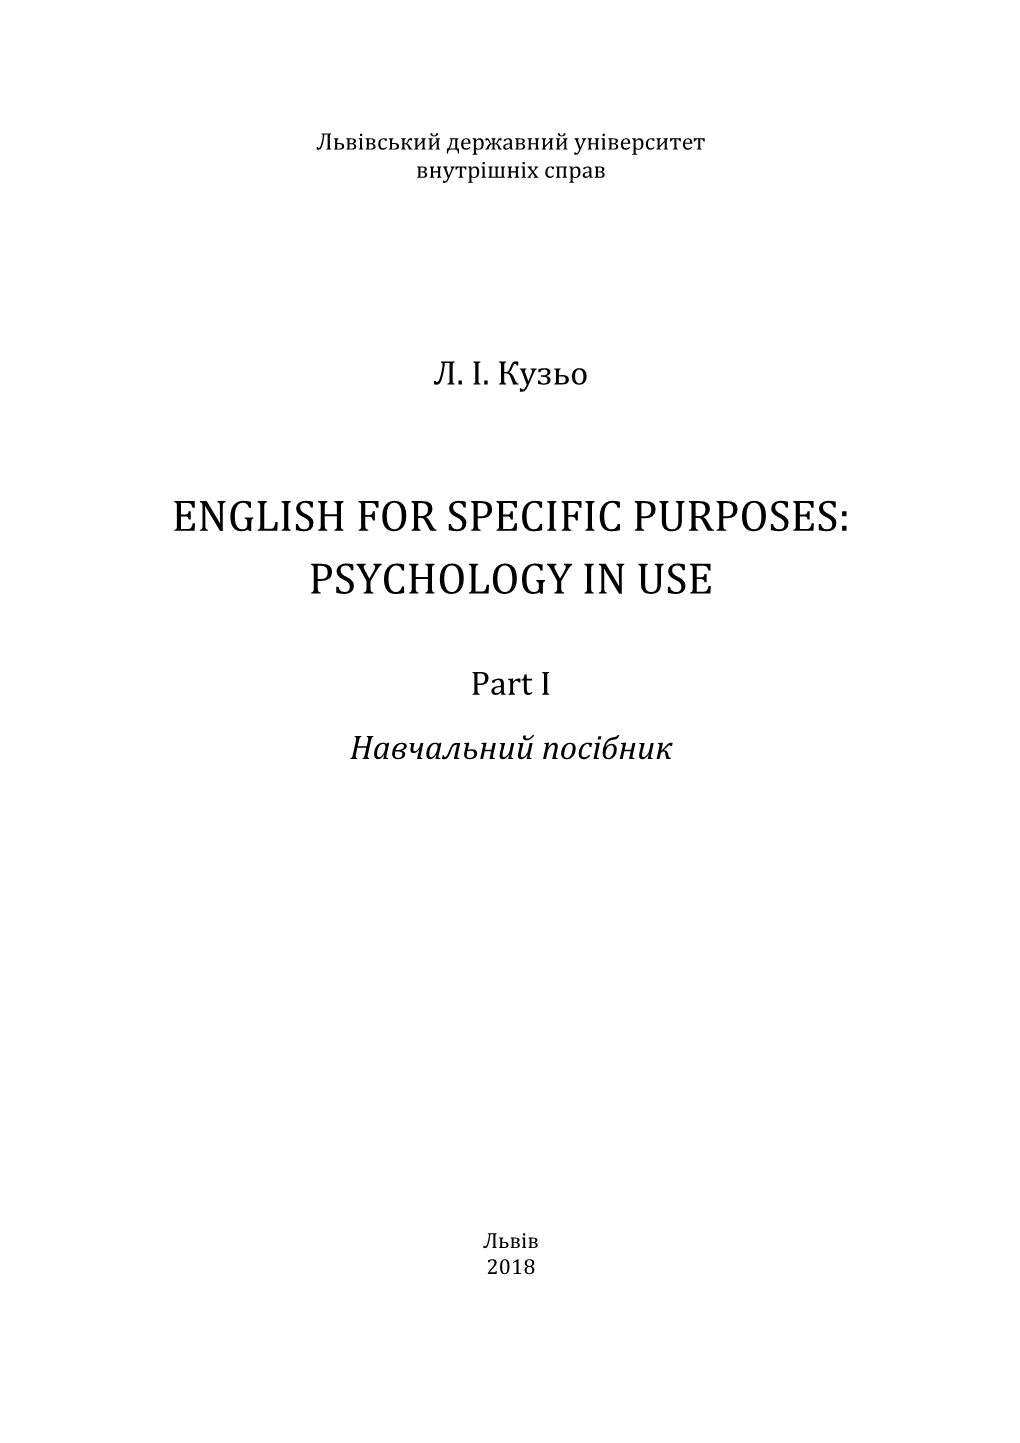 English for Specific Purposes: Psychology in Use